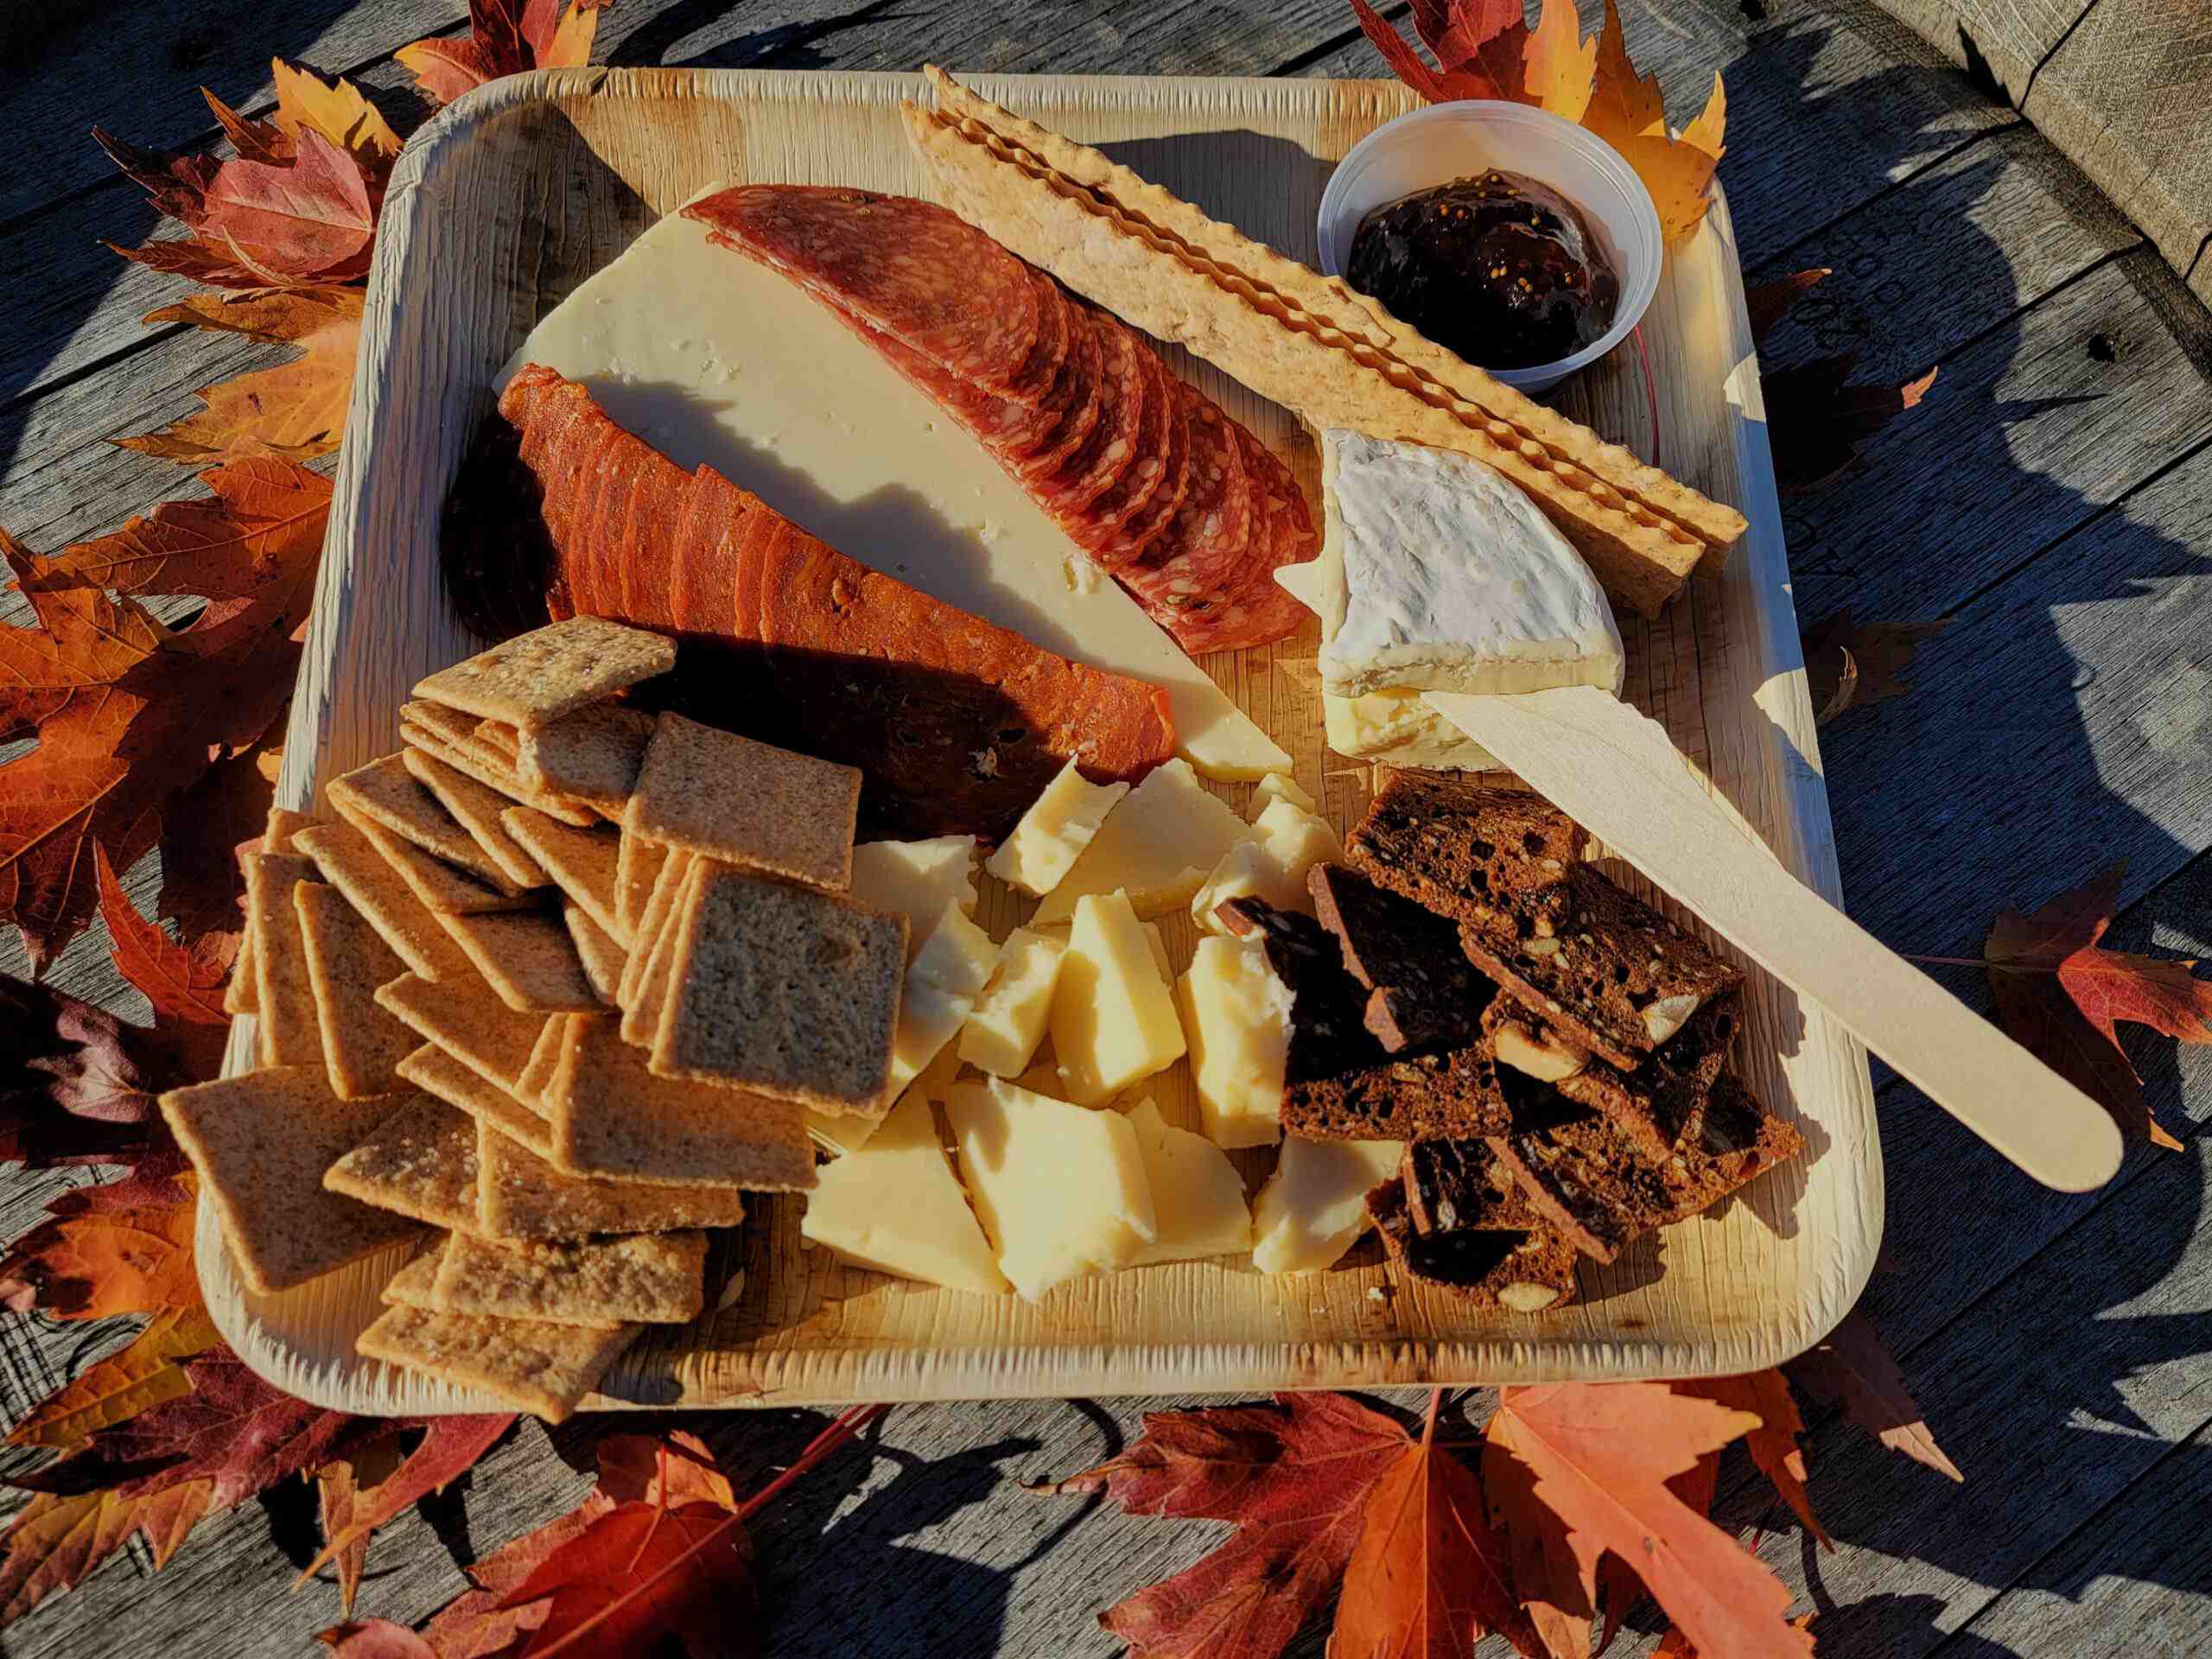 A tray of cheese, crackers and crackers on a wooden table.